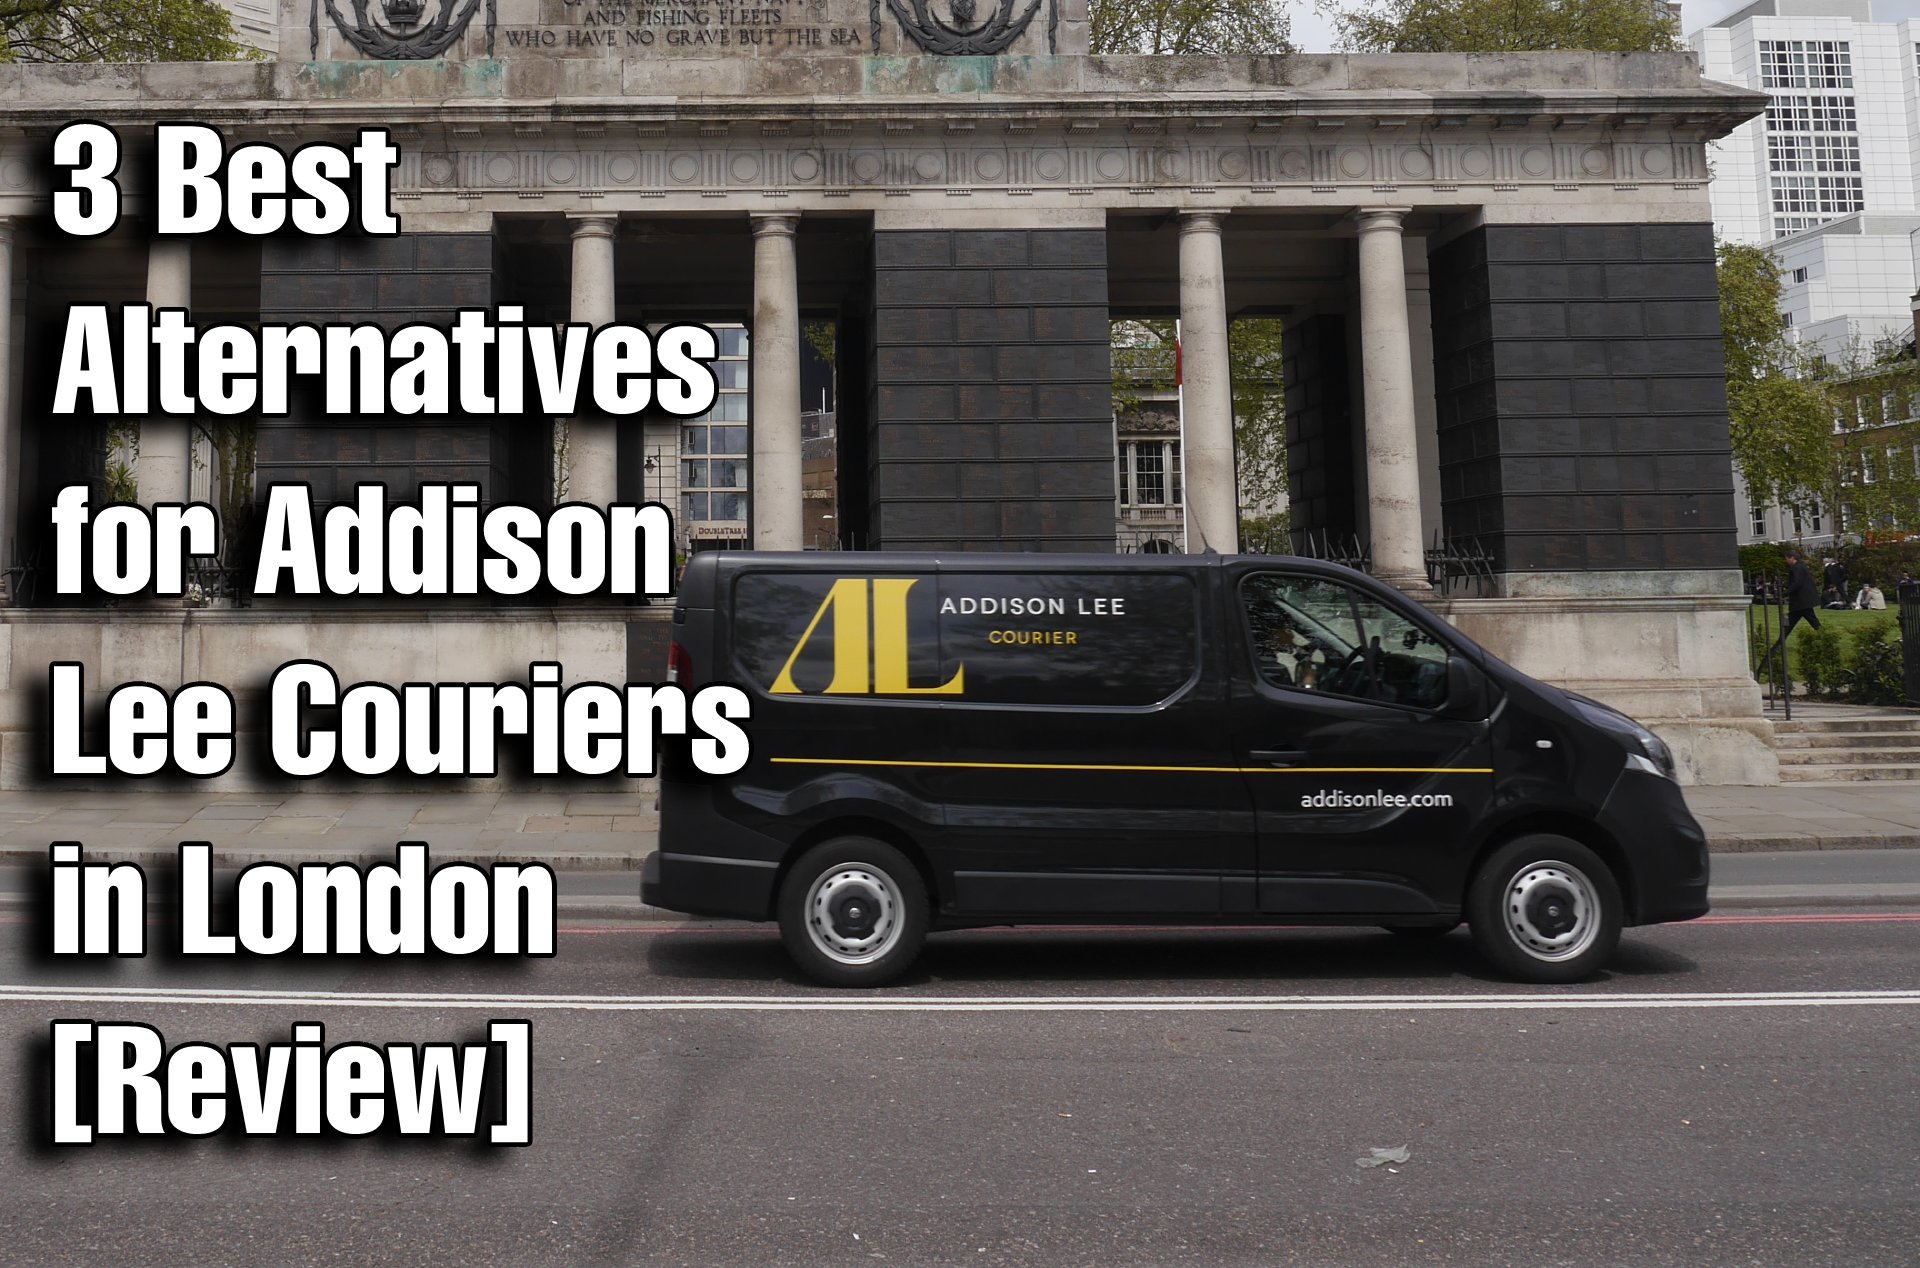 3 Best Alternatives for Addison Lee Couriers in London [Review]